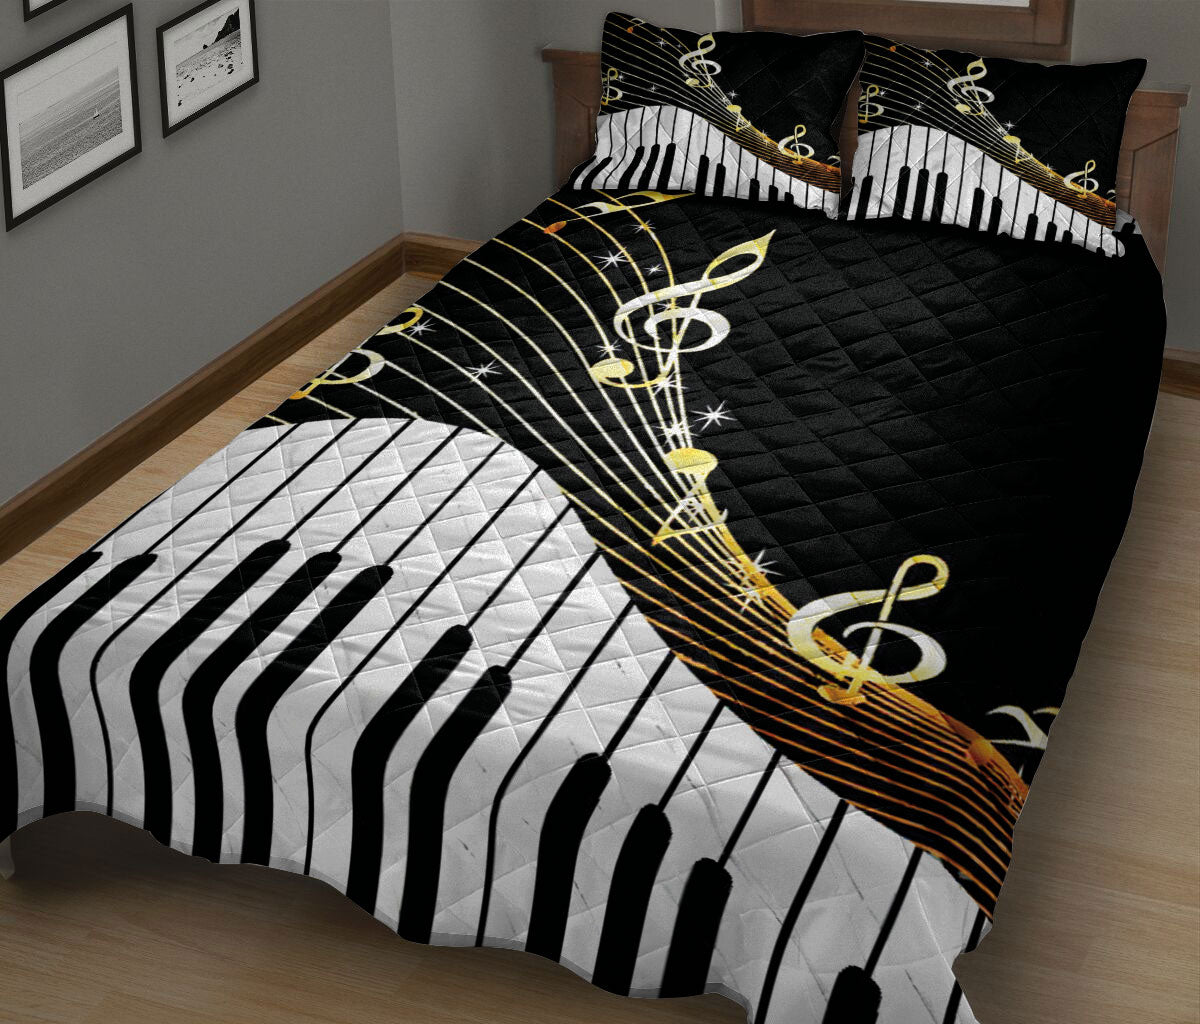 Ohaprints-Quilt-Bed-Set-Pillowcase-Music-Piano-Keys-Golden-Music-Notes-Music-Theme-Musical-Note-Black-White-Blanket-Bedspread-Bedding-2659-King (90'' x 100'')